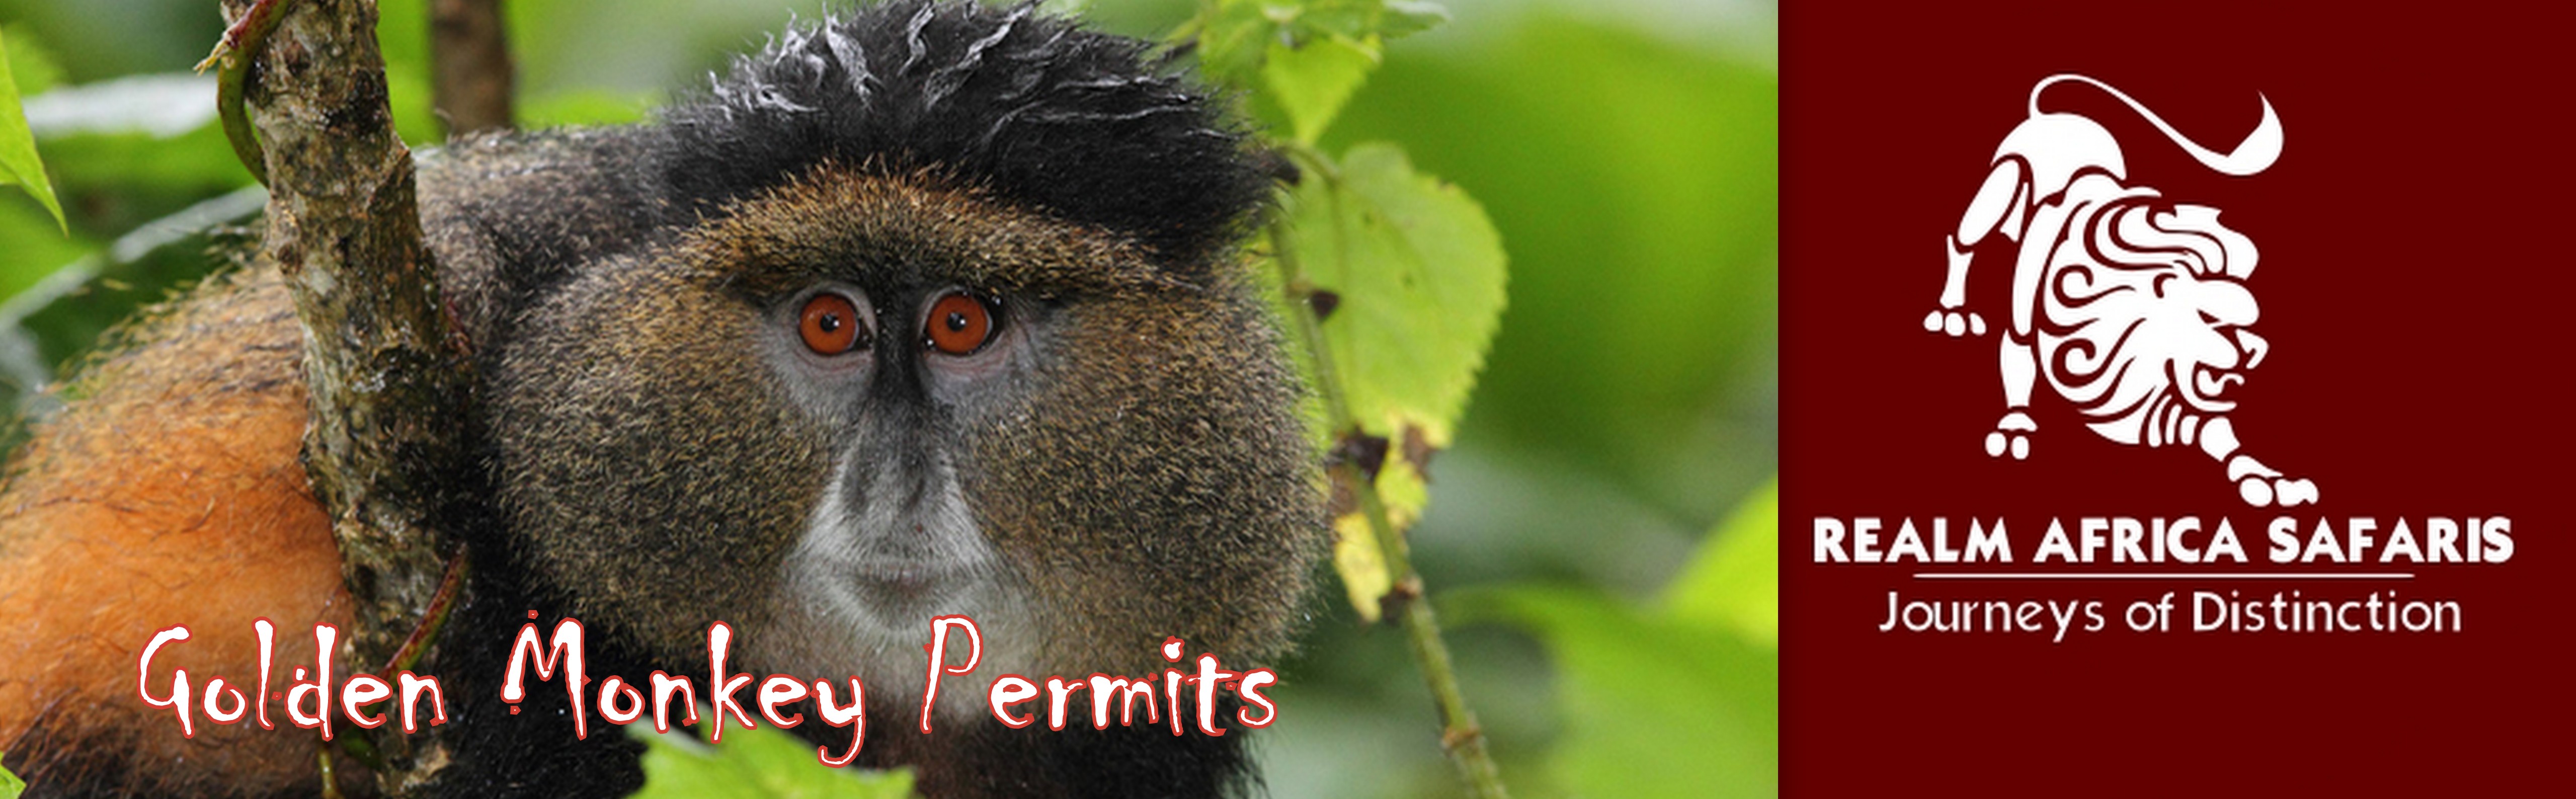 Golden Monkey Permits, Information about the Price & How to book